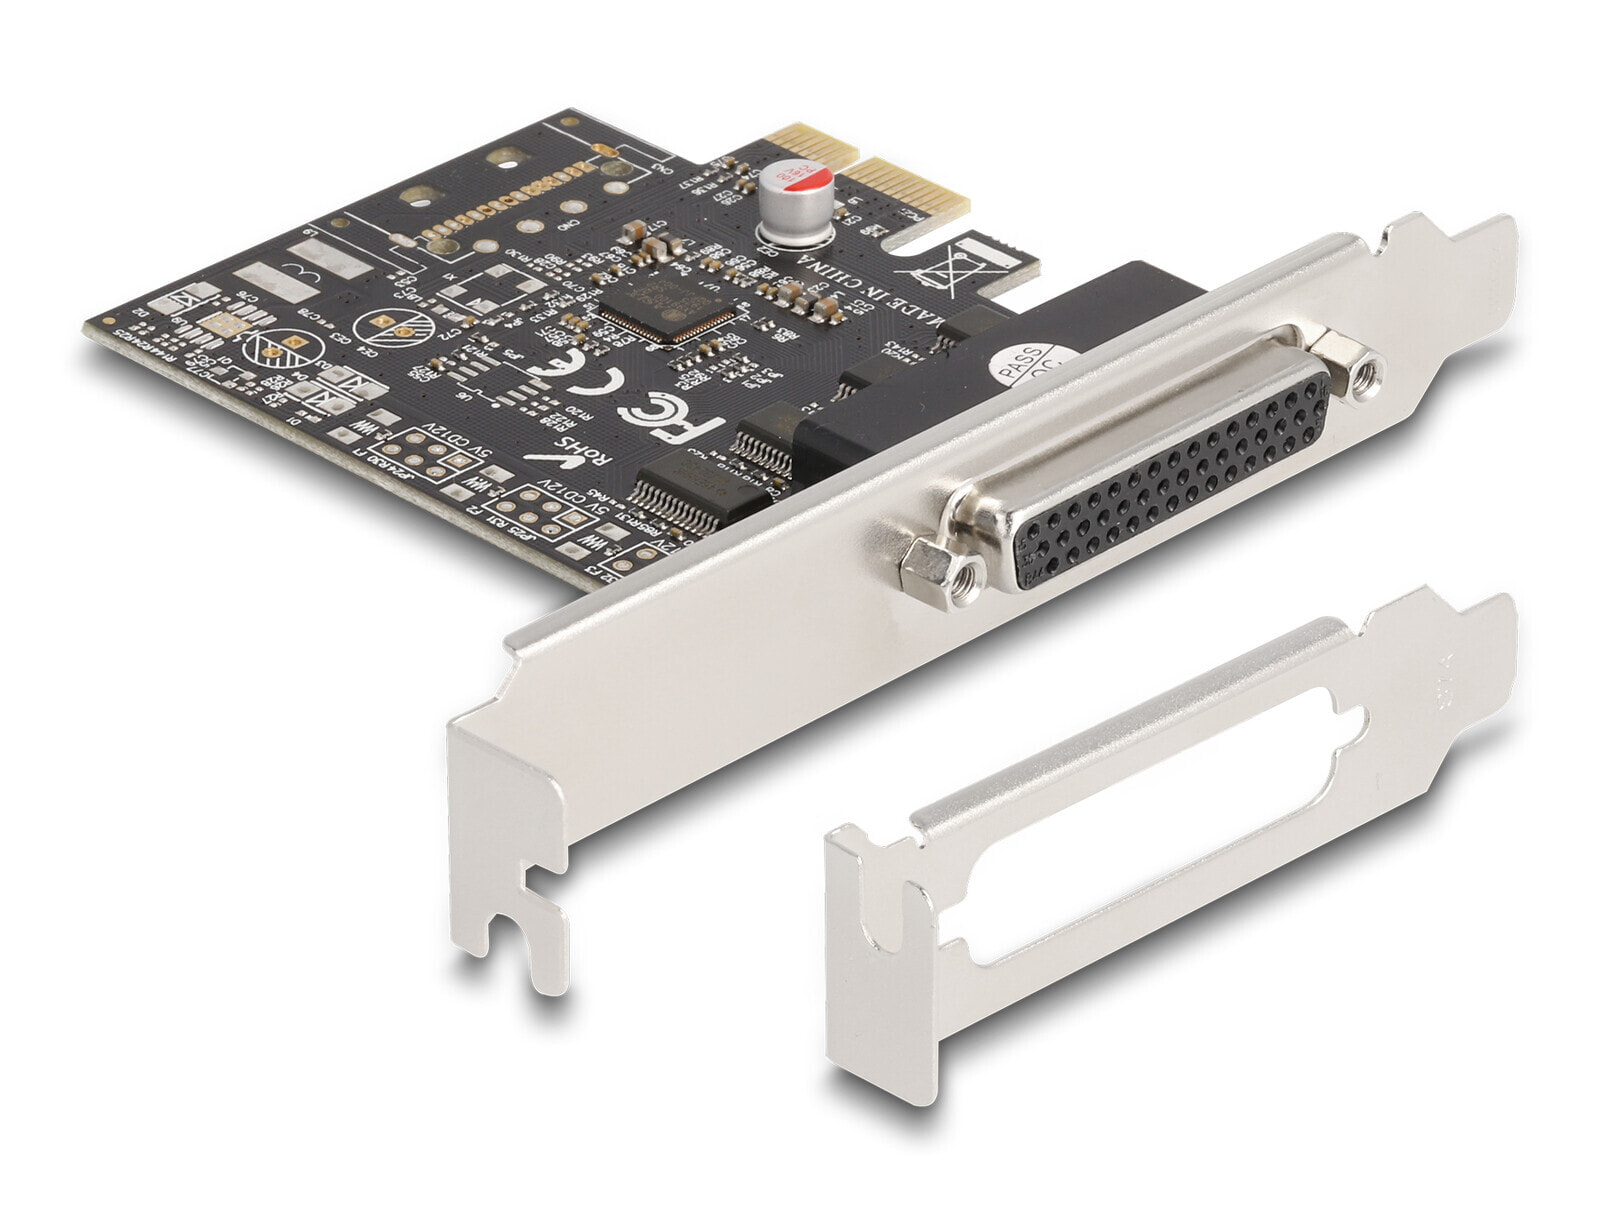 66324 - PCIe - RS-232 - VGA - Female - Full-height / Low-profile - PCIe 2.0 - RS-232